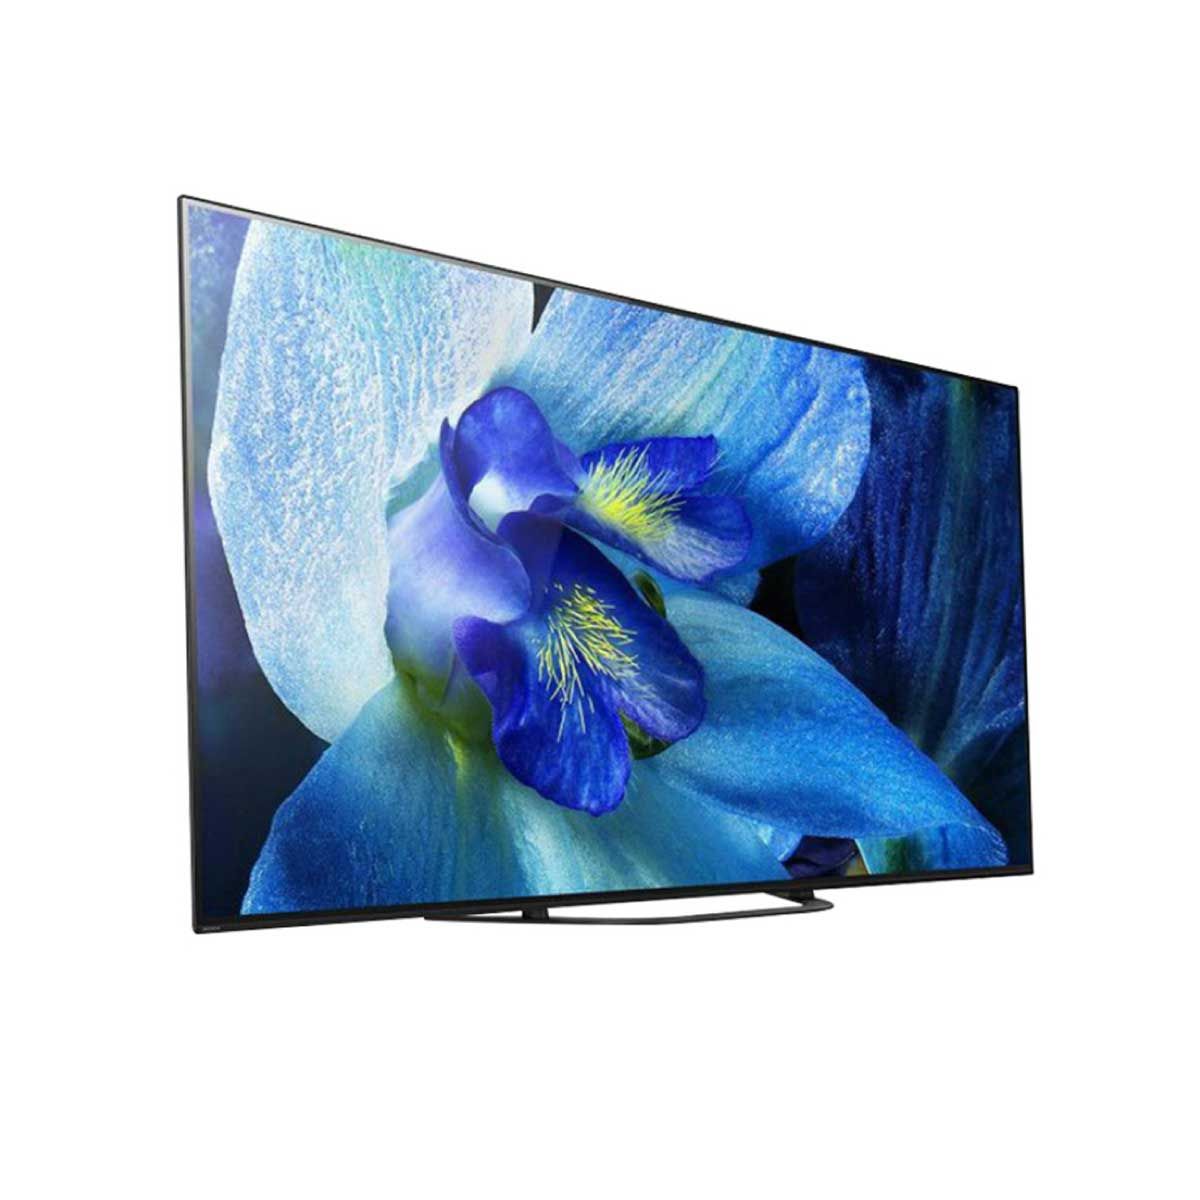 SONY OLED Android TV รุ่น KD-55A8G   High Dynamic Range  HDR  Android TV